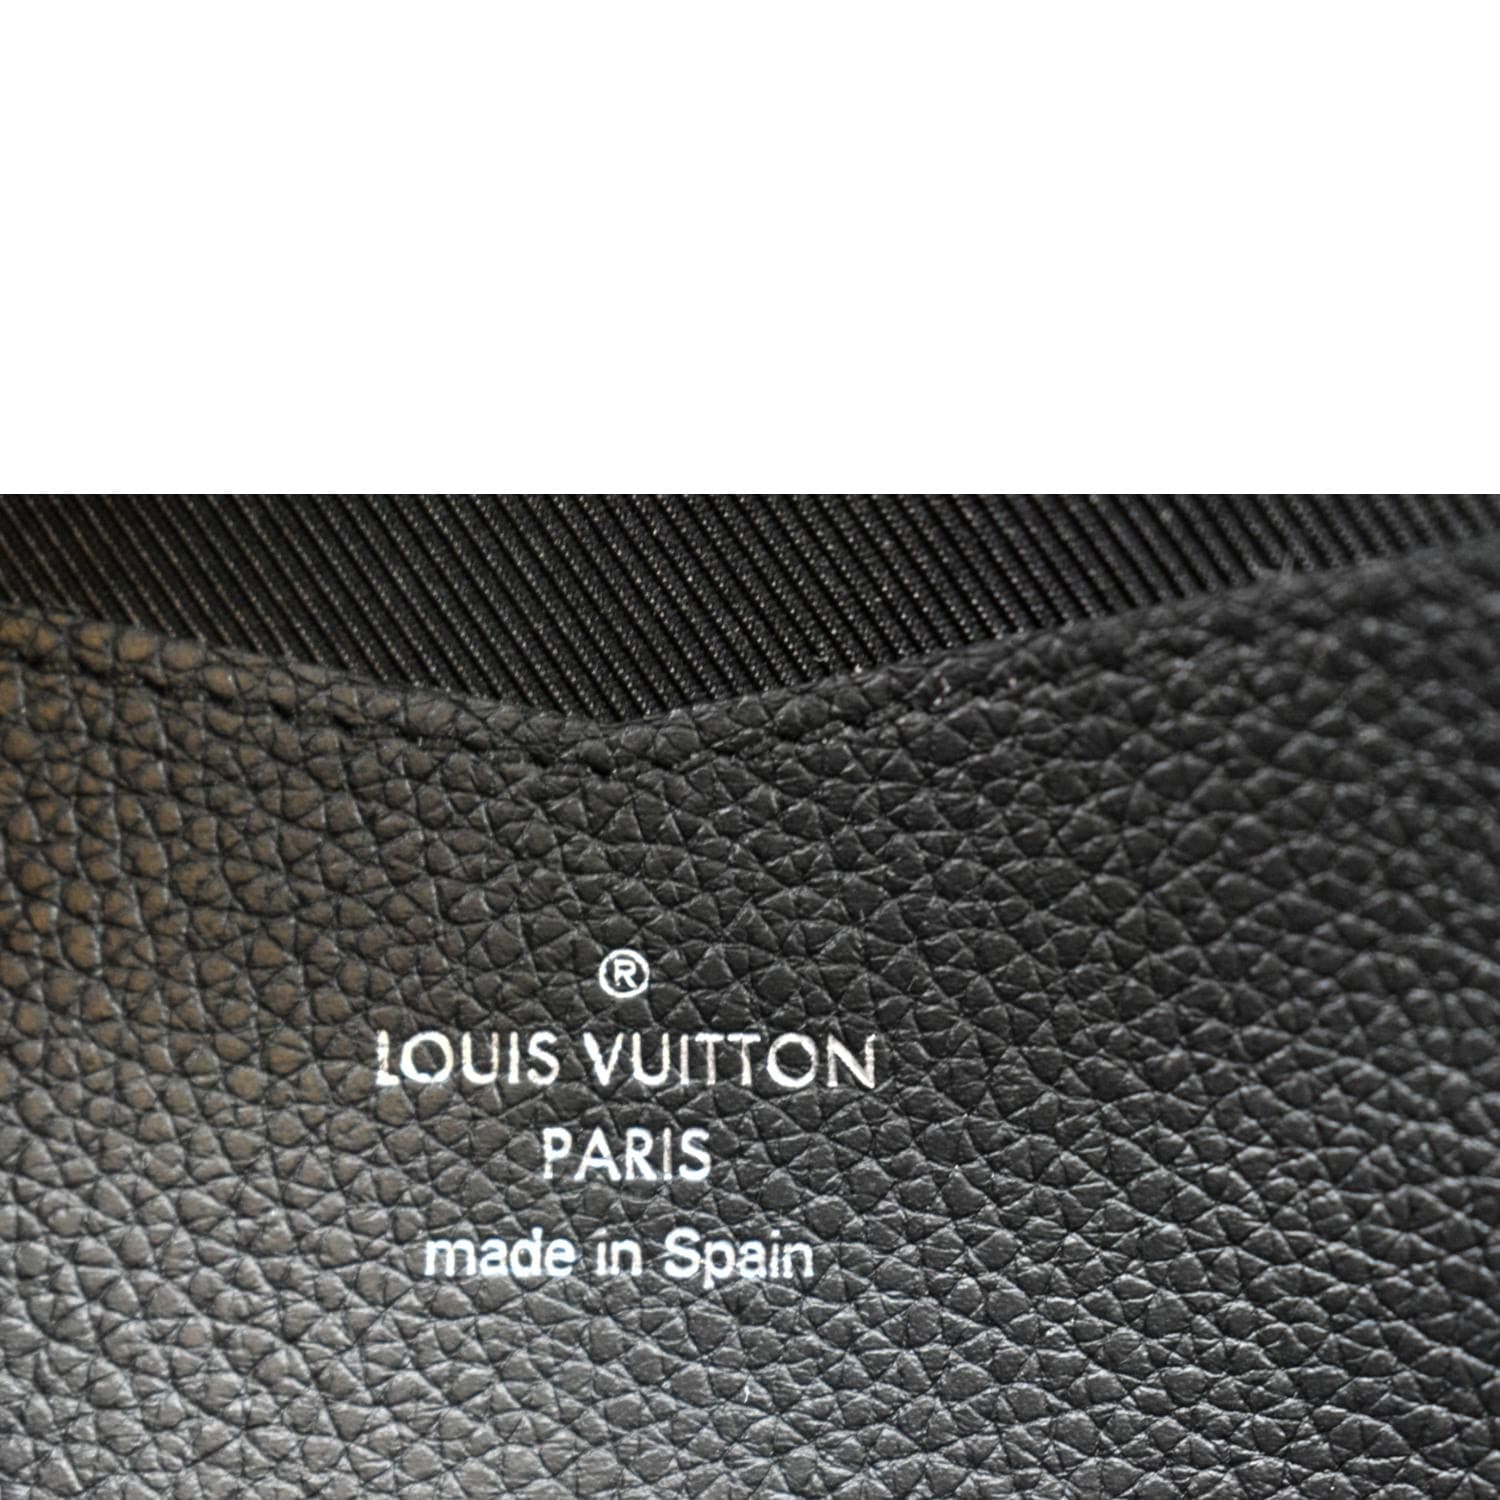 Authenticated Used Louis Vuitton LOUIS VUITTON Portefeuille Lock Me 2 Calf  Leather Black M62329 Long Wallet with Hook 